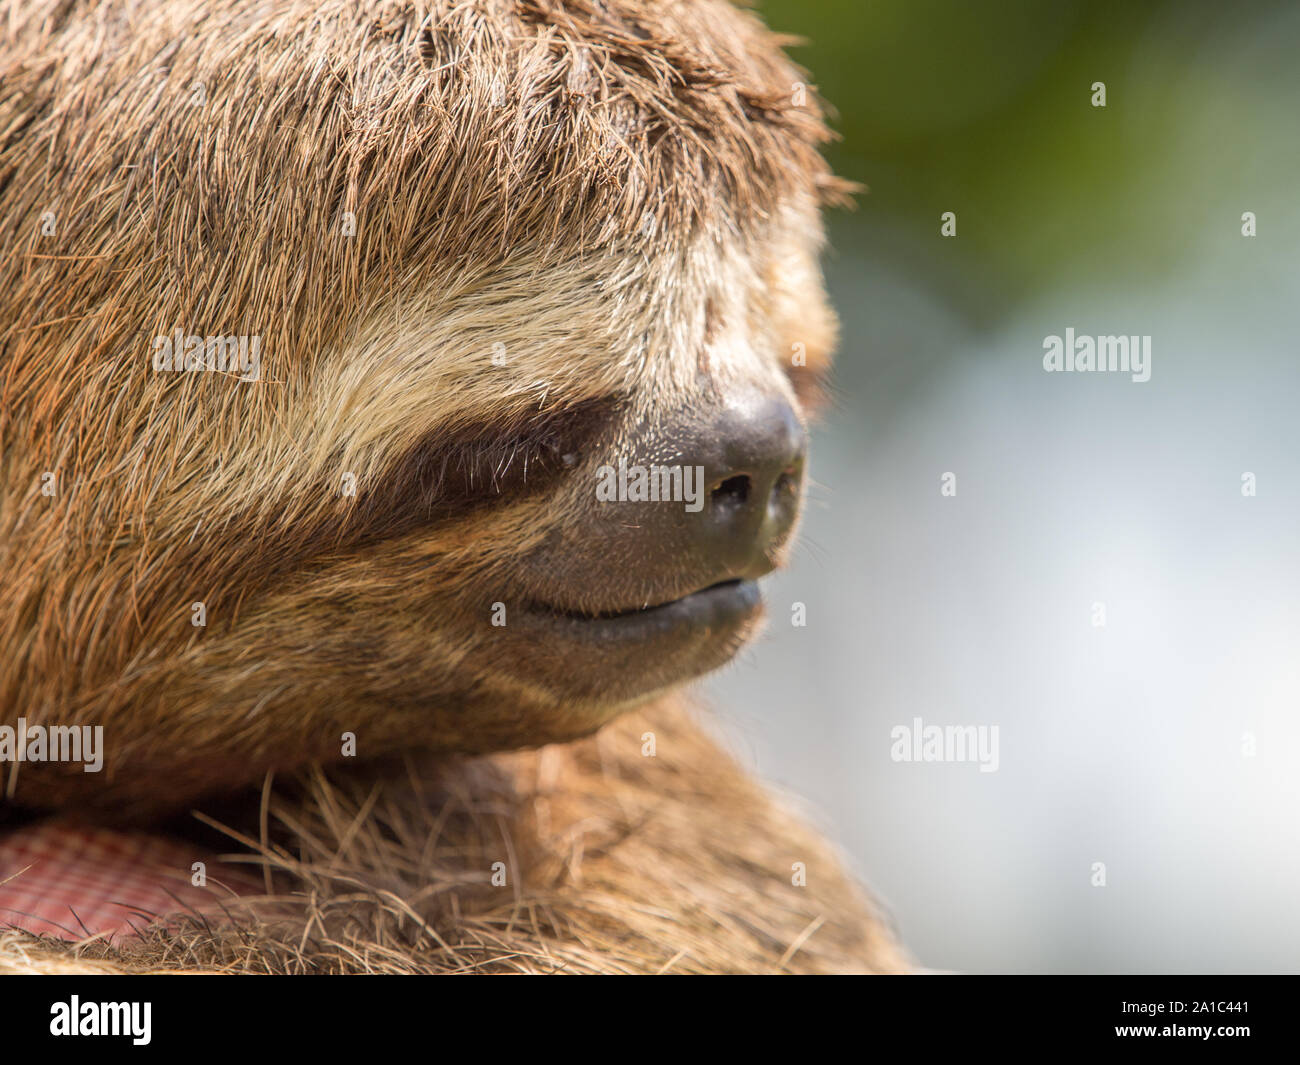 Sloths are arboreal mammals noted for slowness of movement and for spending most of their lives hanging upside down in the trees of the tropical rain Stock Photo